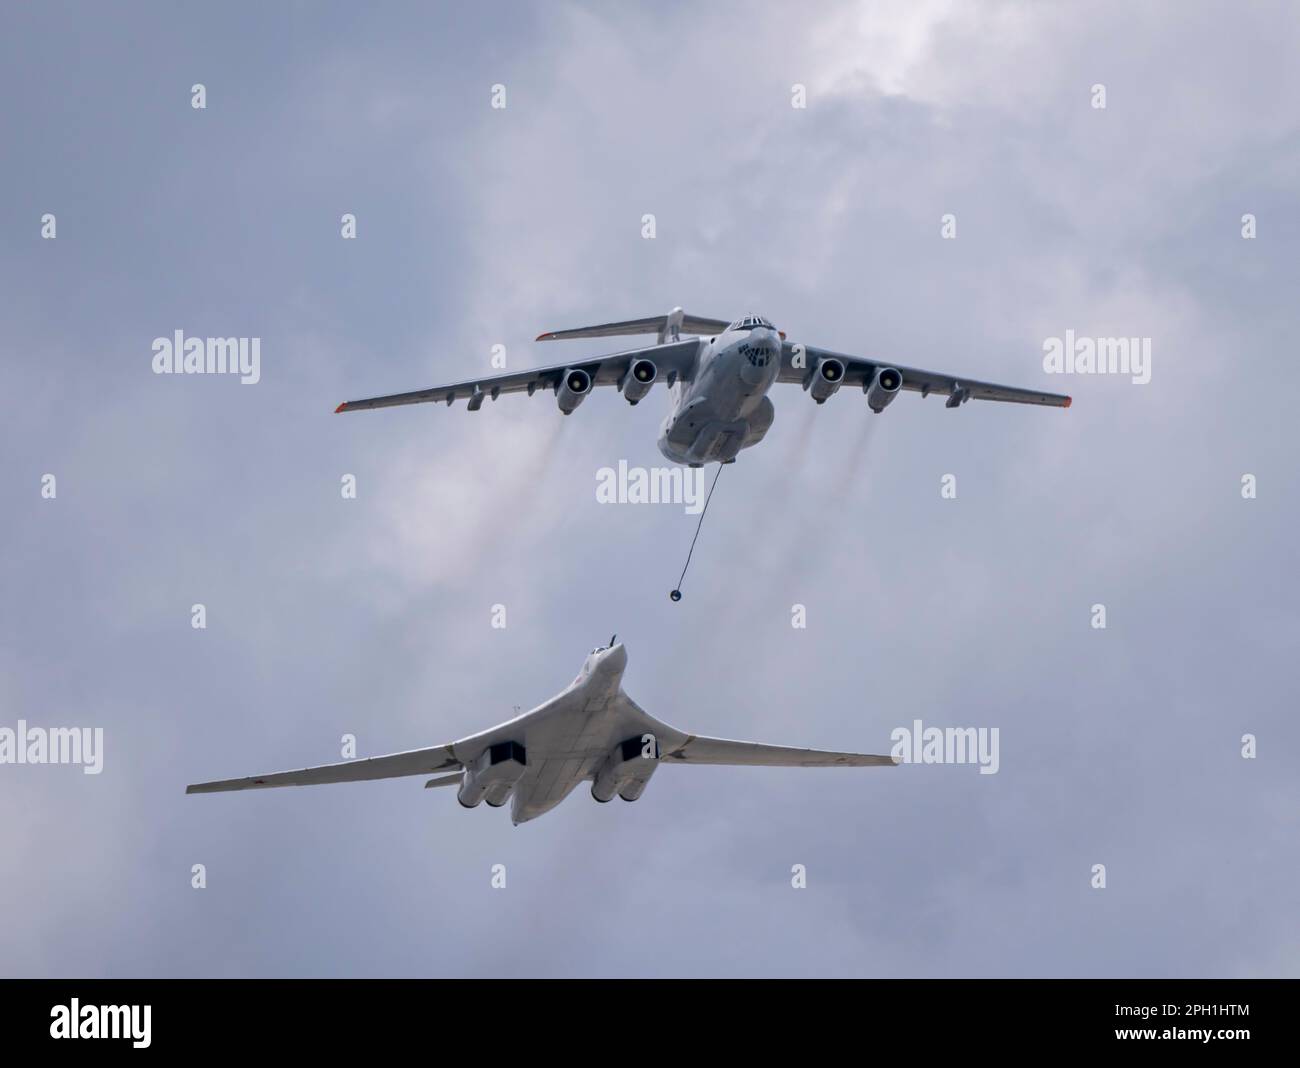 MOSCOW, RUSSIA - MAY 7, 2021: Avia parade in Moscow. tanker Ilyushin Il-78 and strategic bomber and missile platform Tu-160 in the sky on parade of Vi Stock Photo